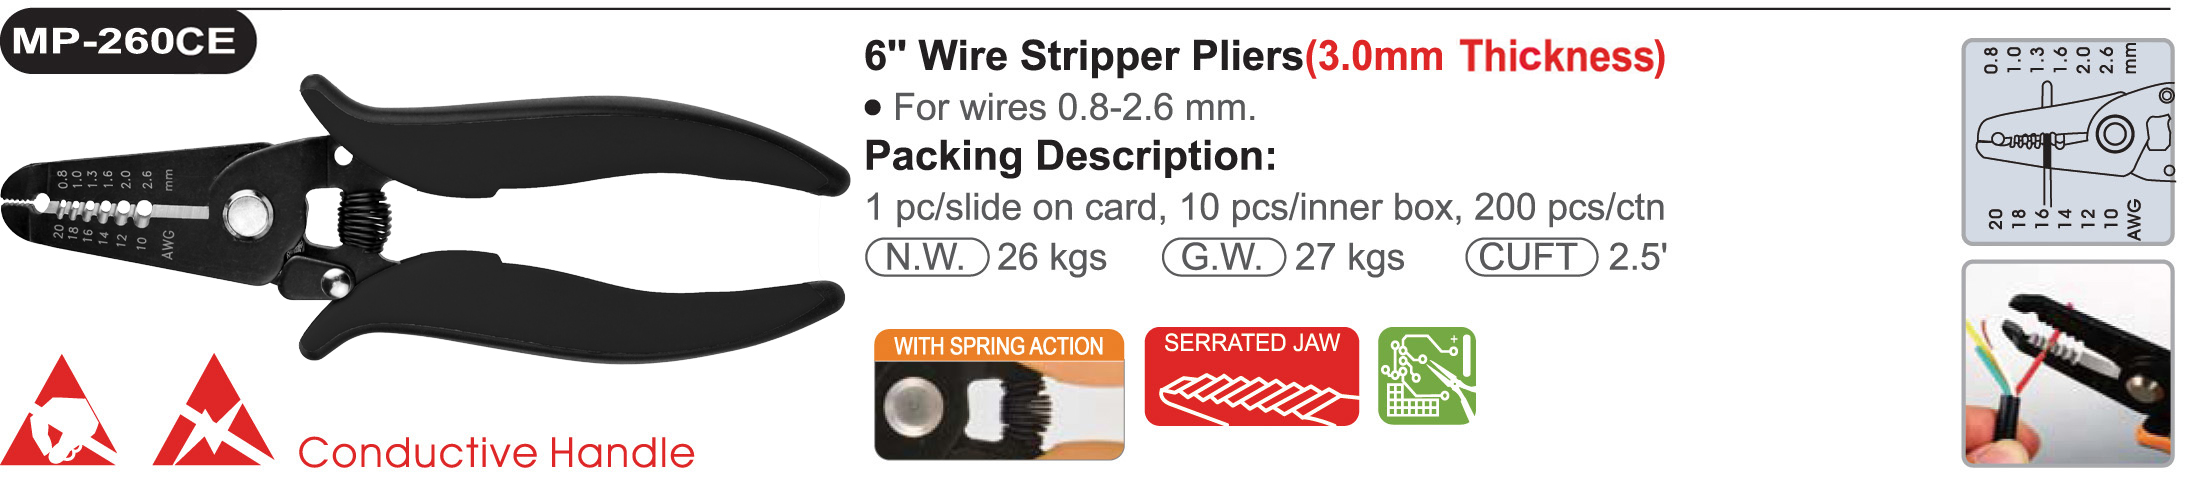 proimages/product/pliers/wire_strippers/ELECTRONICS_WIRE_STRIPPER_ESD/MP-260CE/MP-260CE.jpg